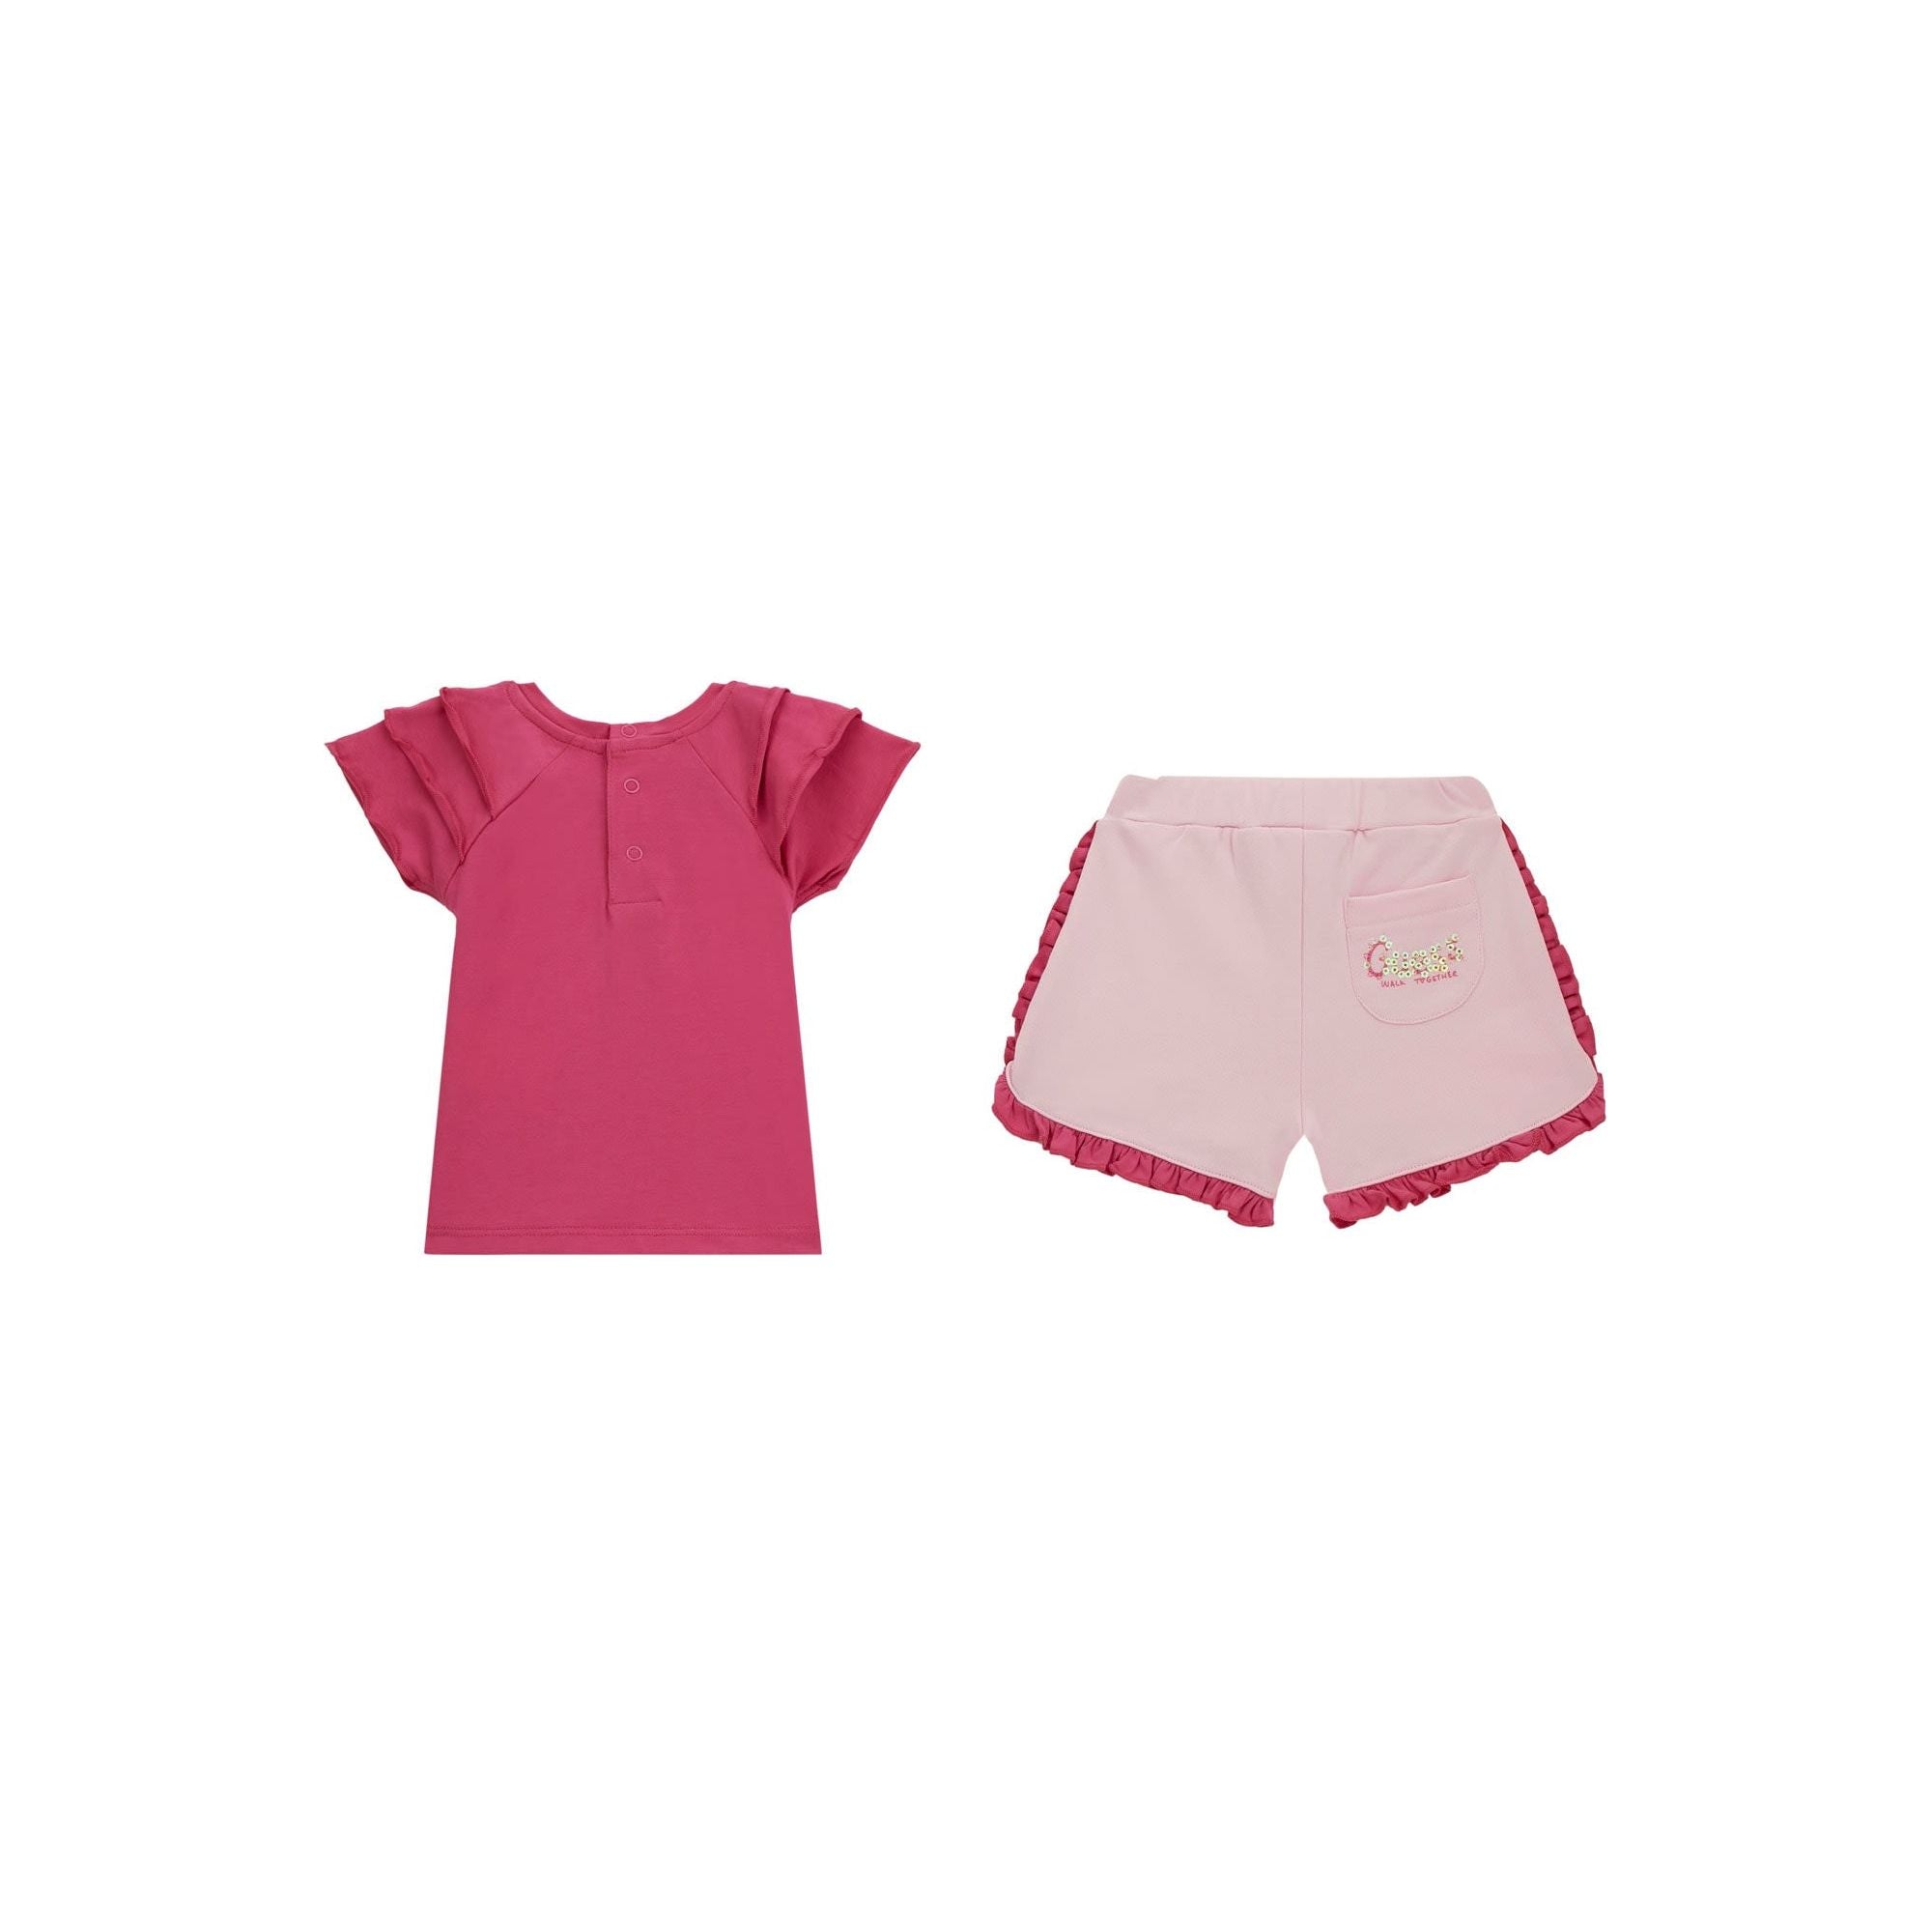 Guess - Infant Girls 2 Piece Short Set in Pink